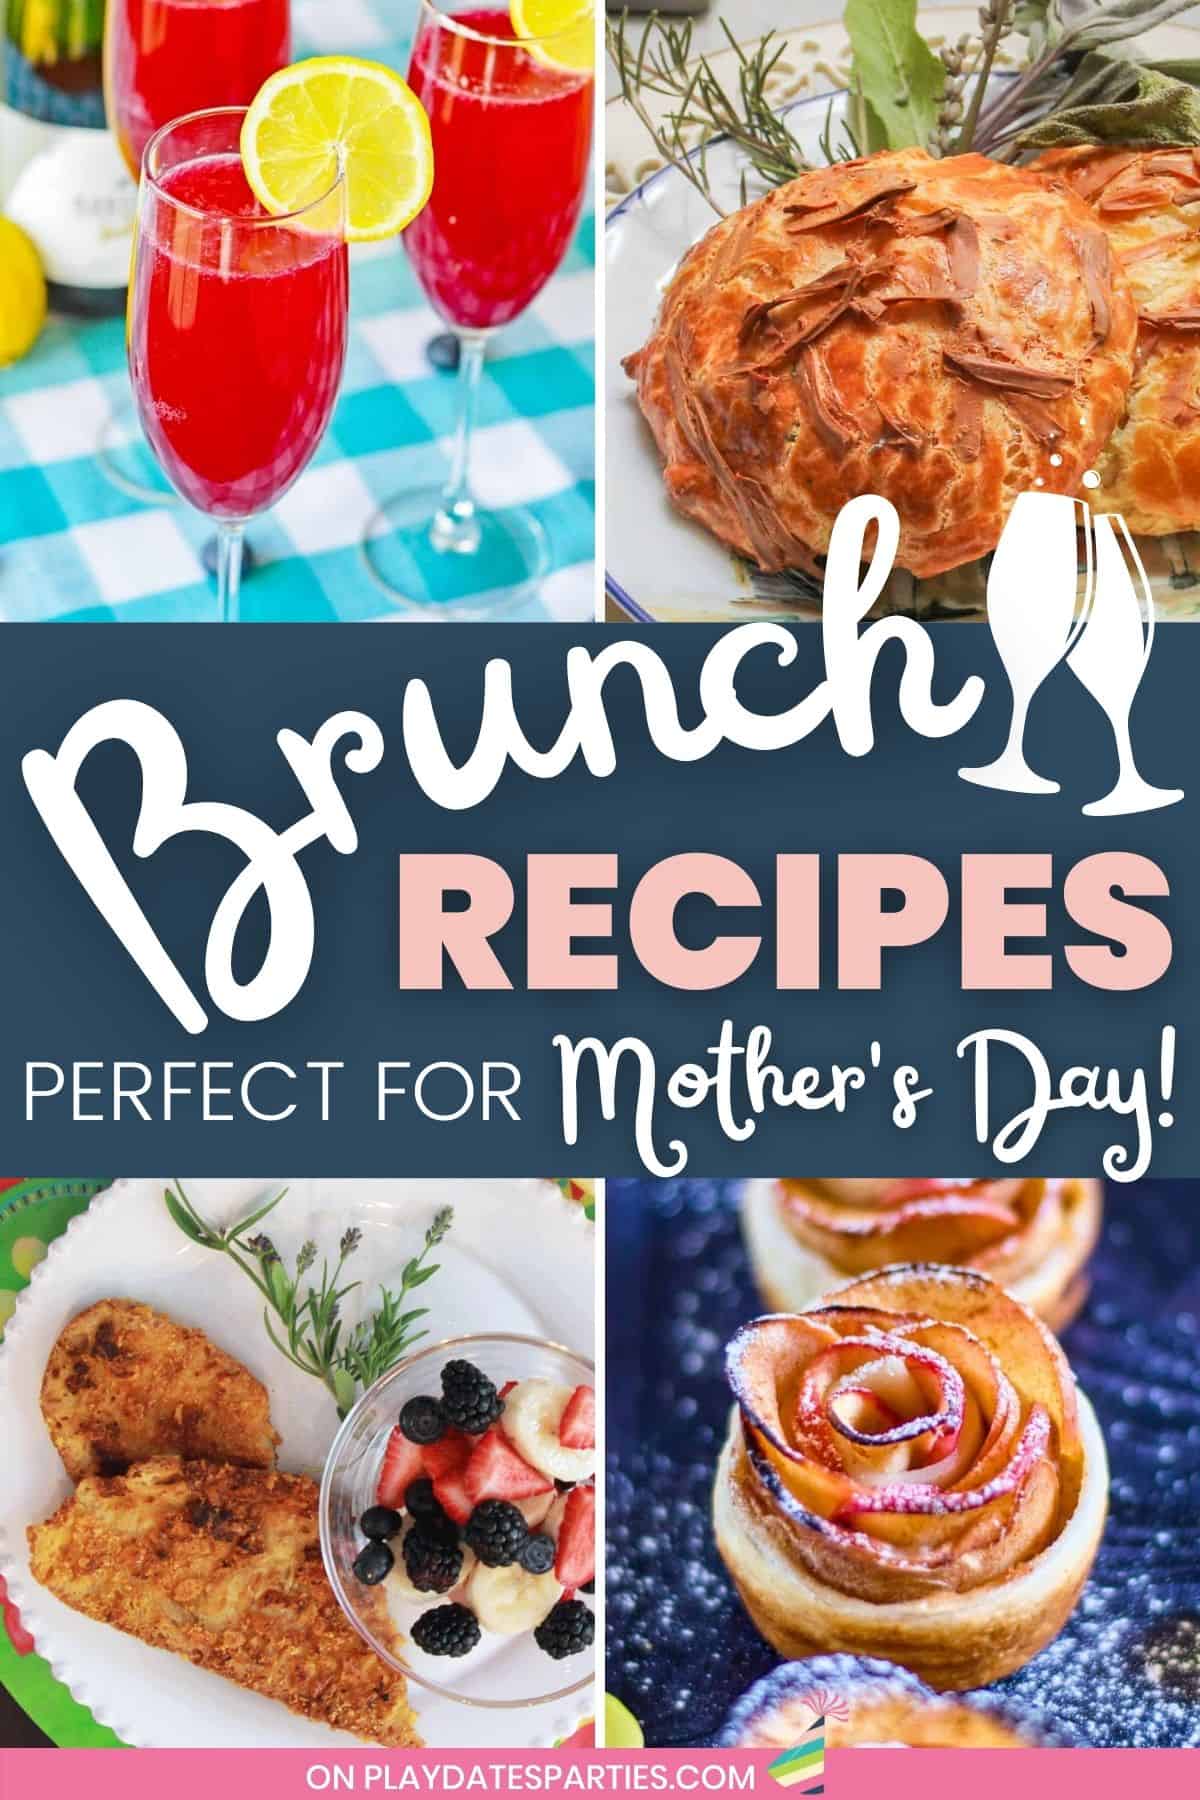 Collage of drinks and breakfast food with text overlay brunch recipes perfect for Mother's Day!